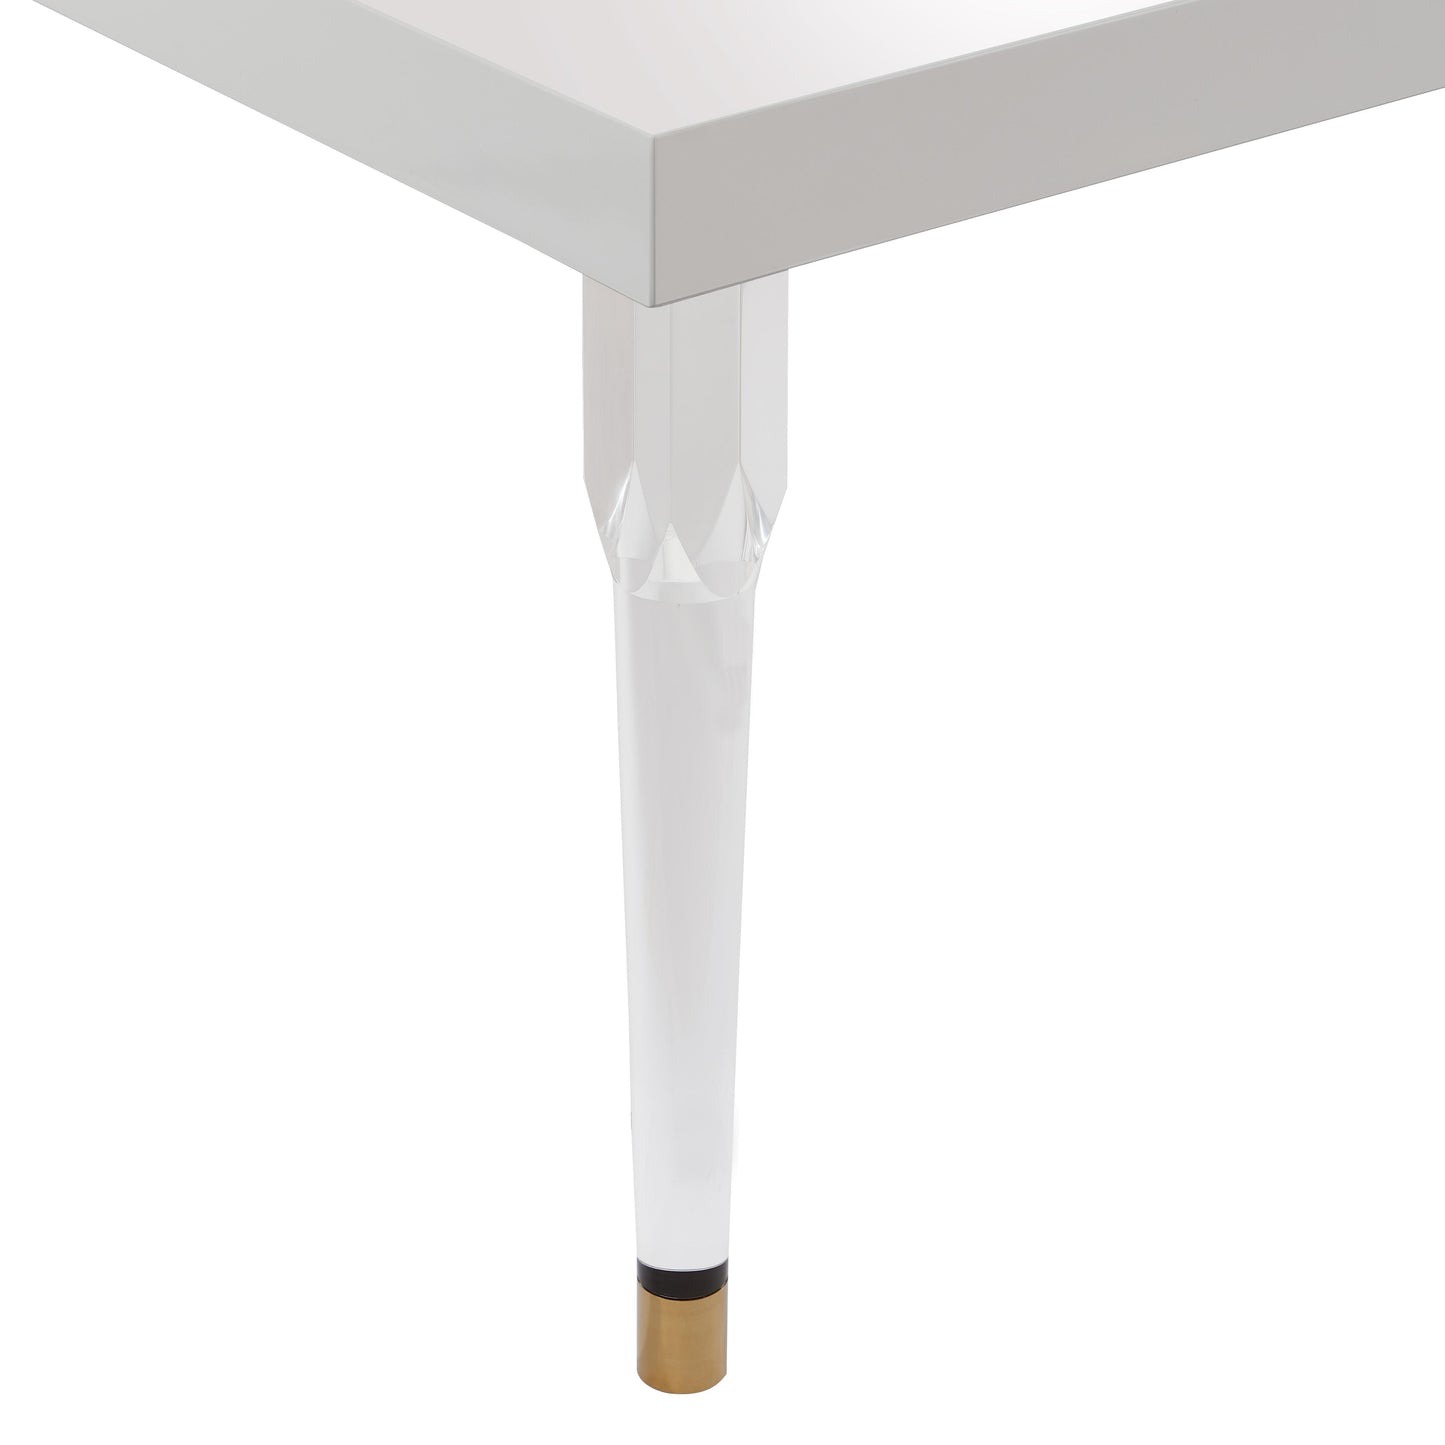 cordoba glossy lacquer dining table